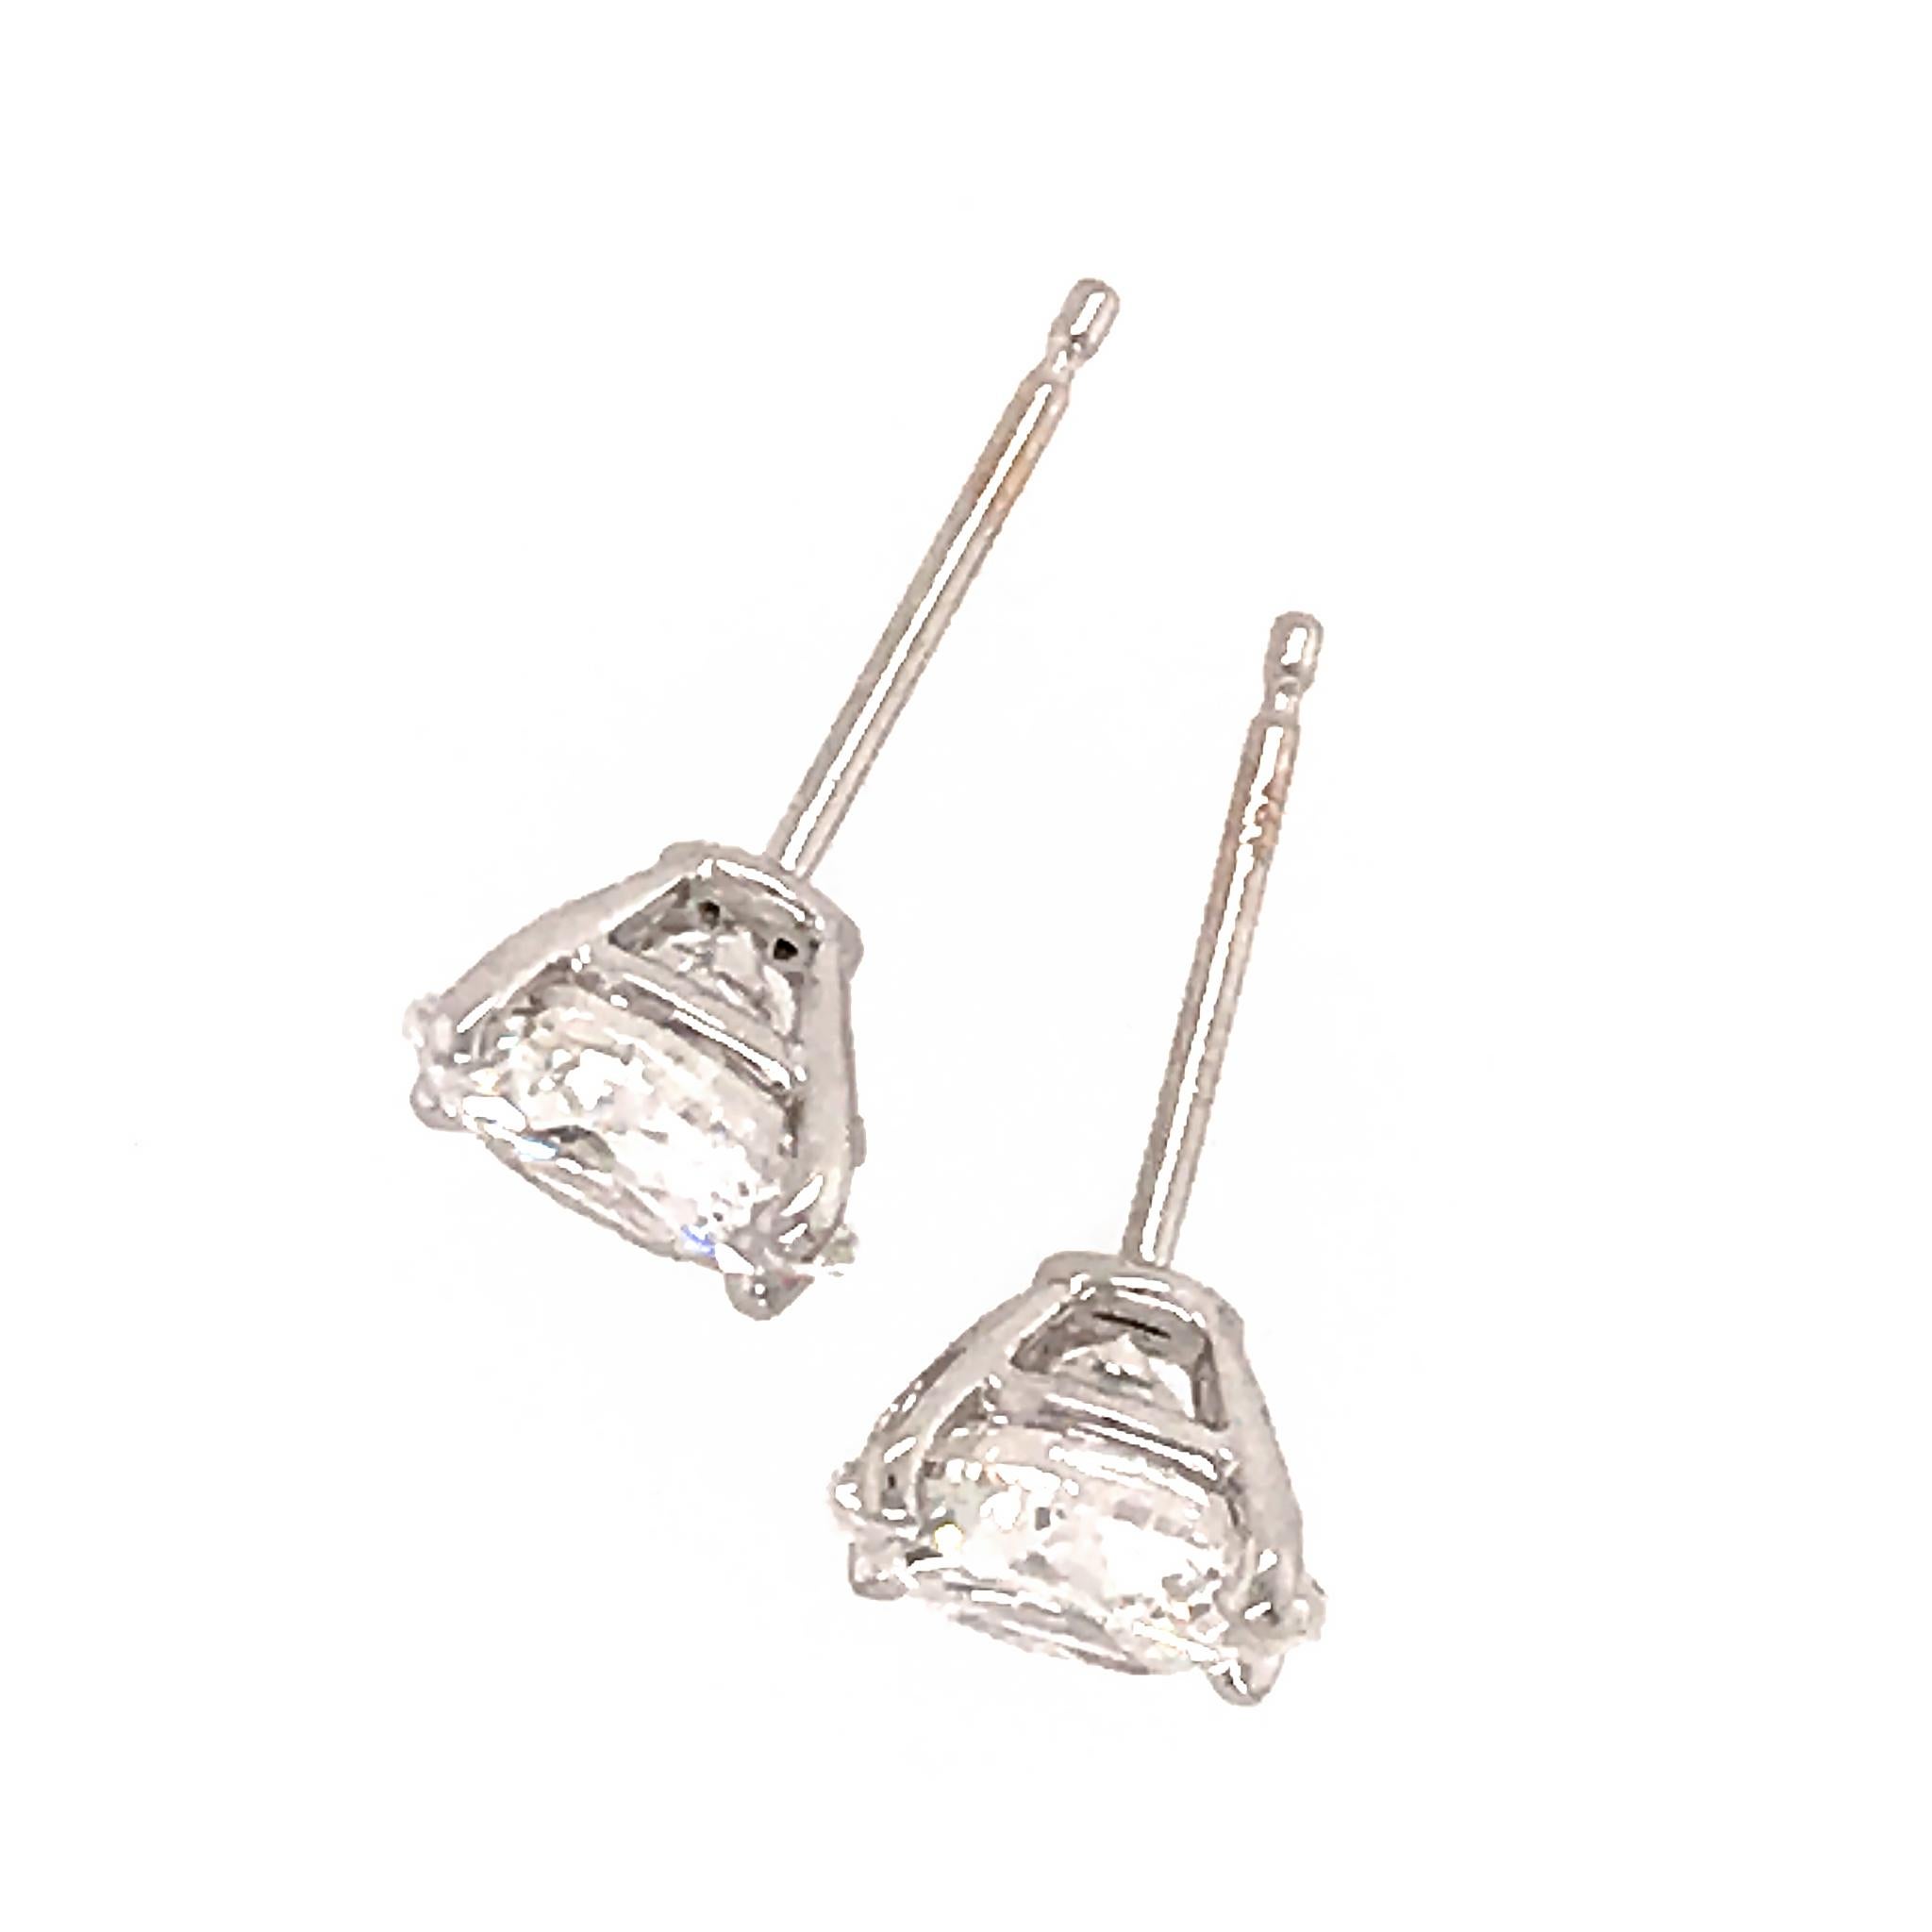 Round Cut Classic GIA Certified Round Brilliant Diamond Studs Earrings